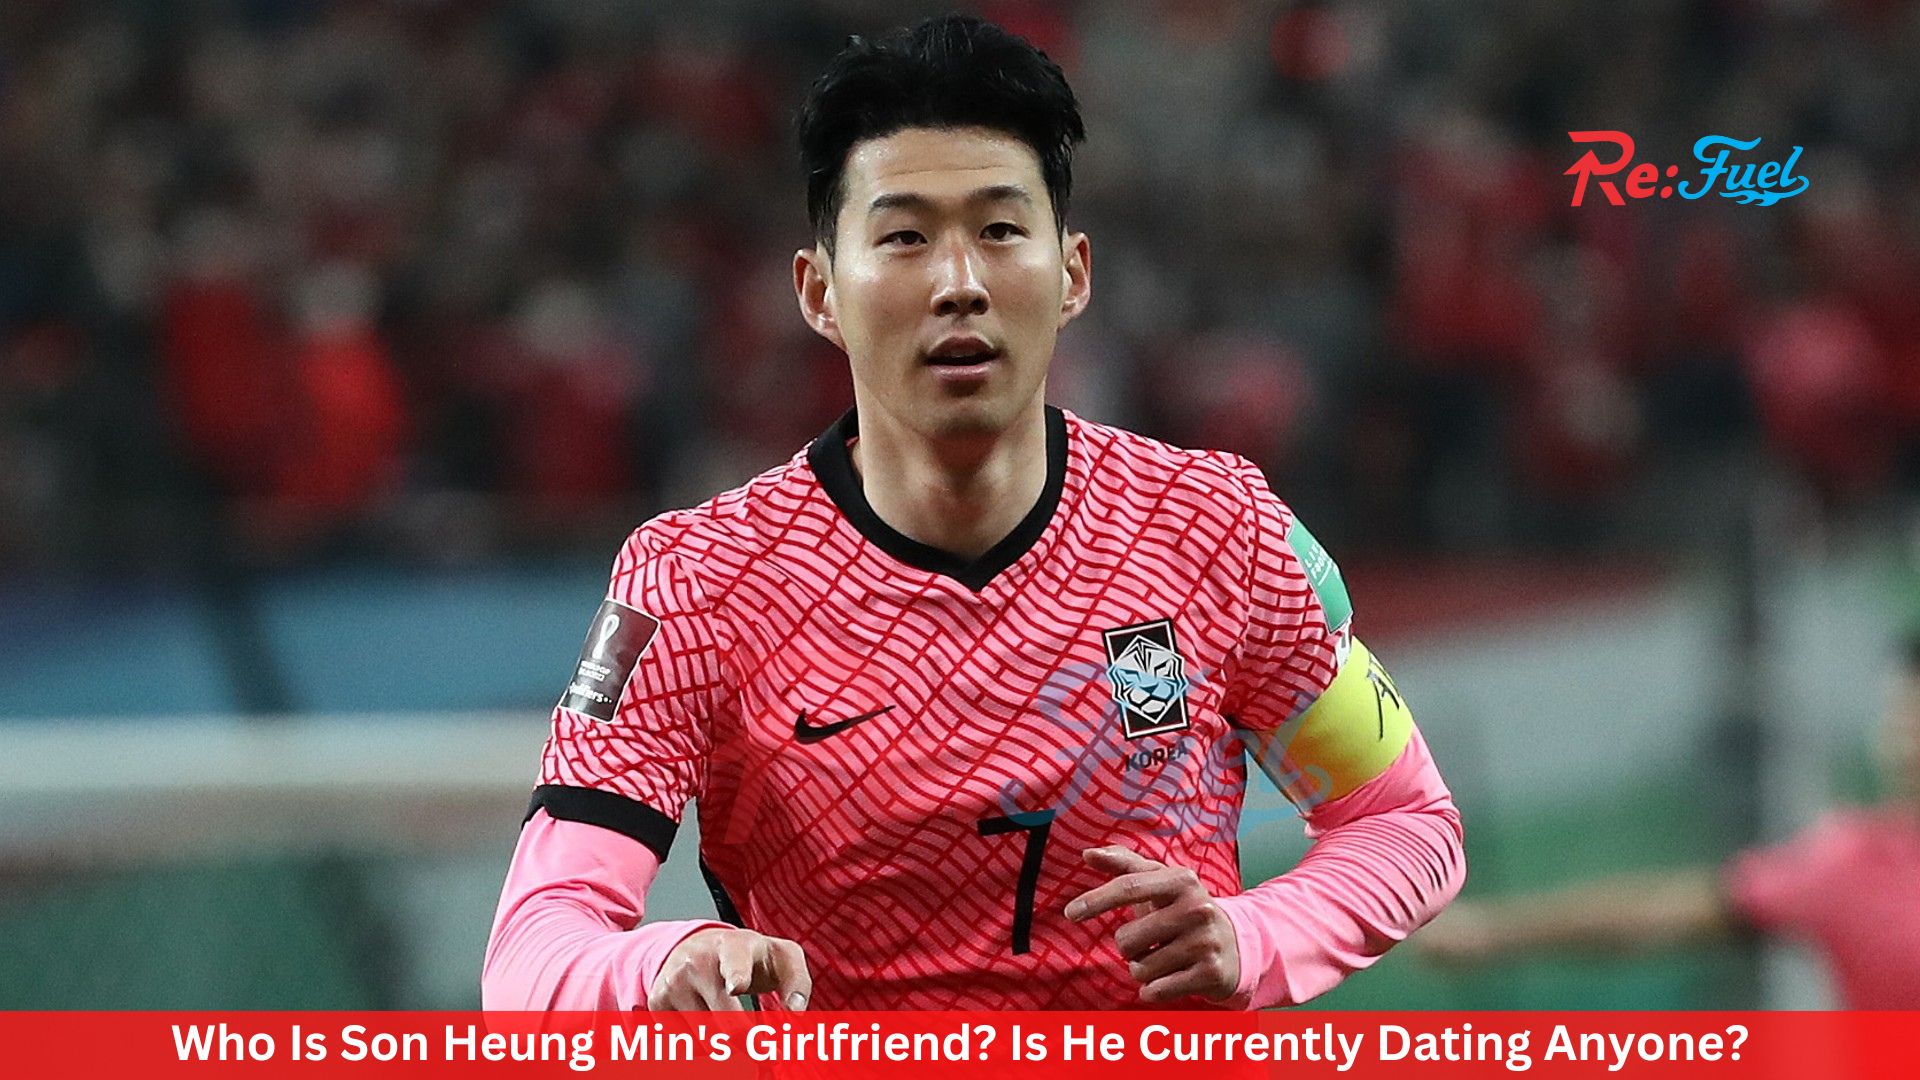 Who Is Son Heung Min's Girlfriend? Is He Currently Dating Anyone?